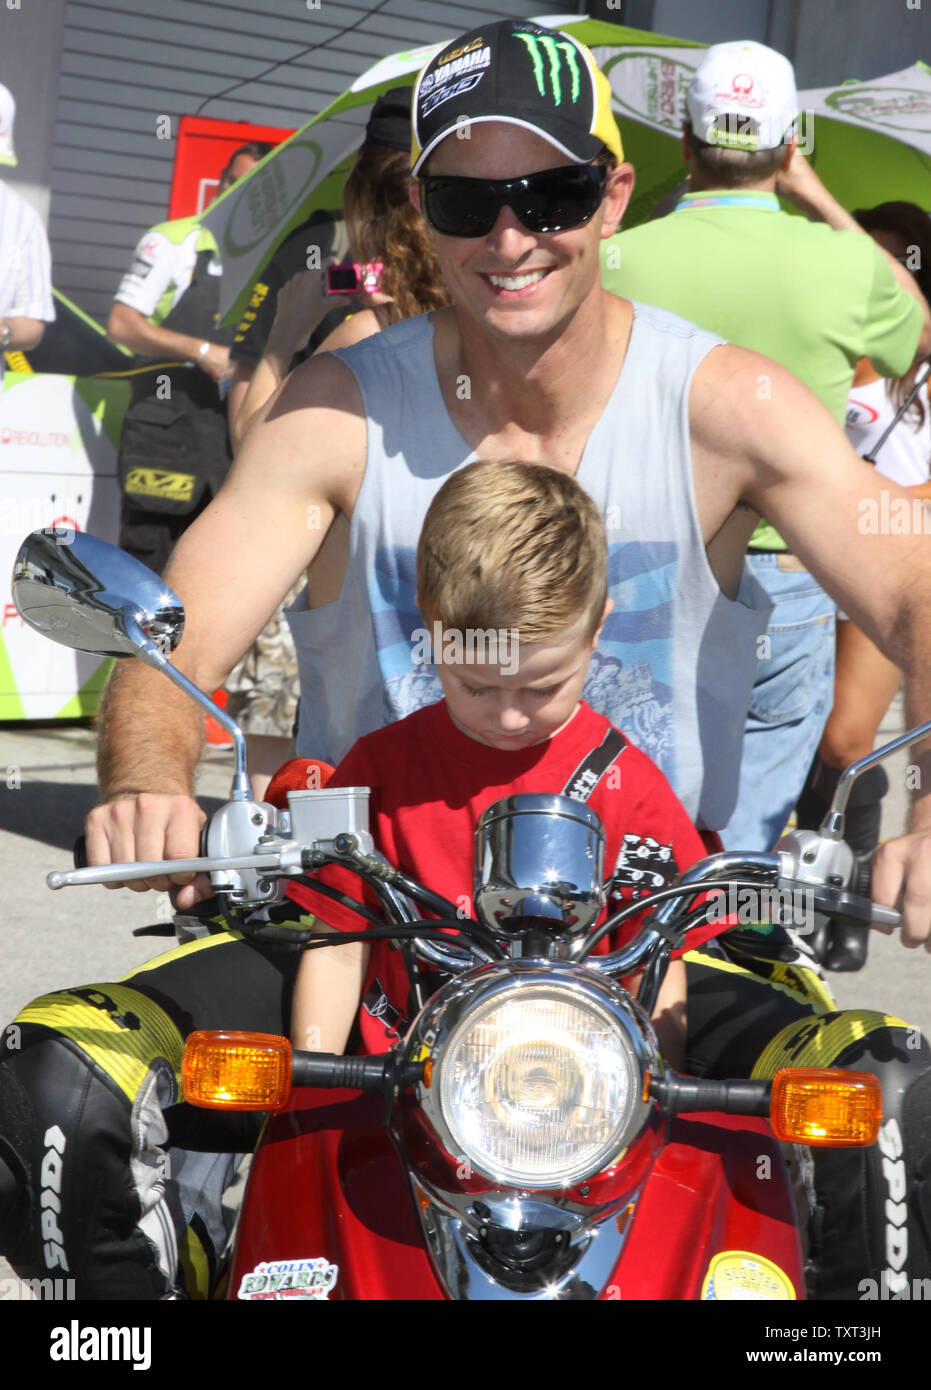 Colin Edwards rides through the pits with his son Hayes before Qualifying the Moto GP at the Indianapolis Motor Speedway  on August 28, 2010in Indianapolis, In. UPI /Ed Locke Stock Photo